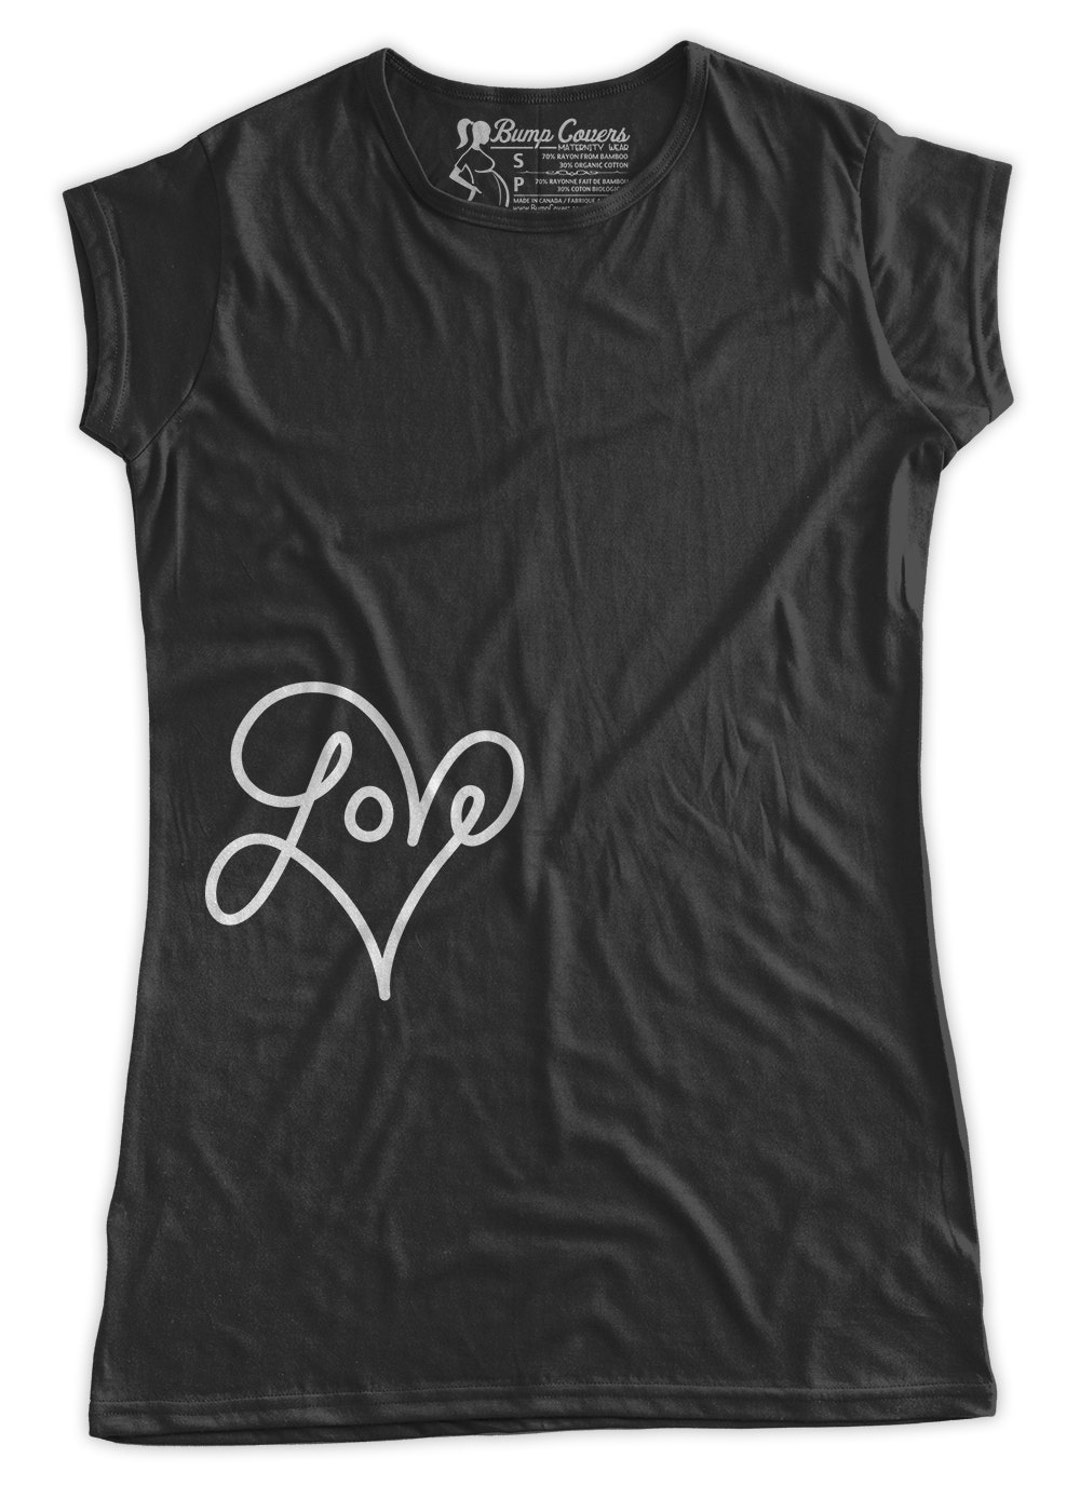 Love Heart Maternity T-shirt Clothes Top Fun Tattoo Style - Etsy